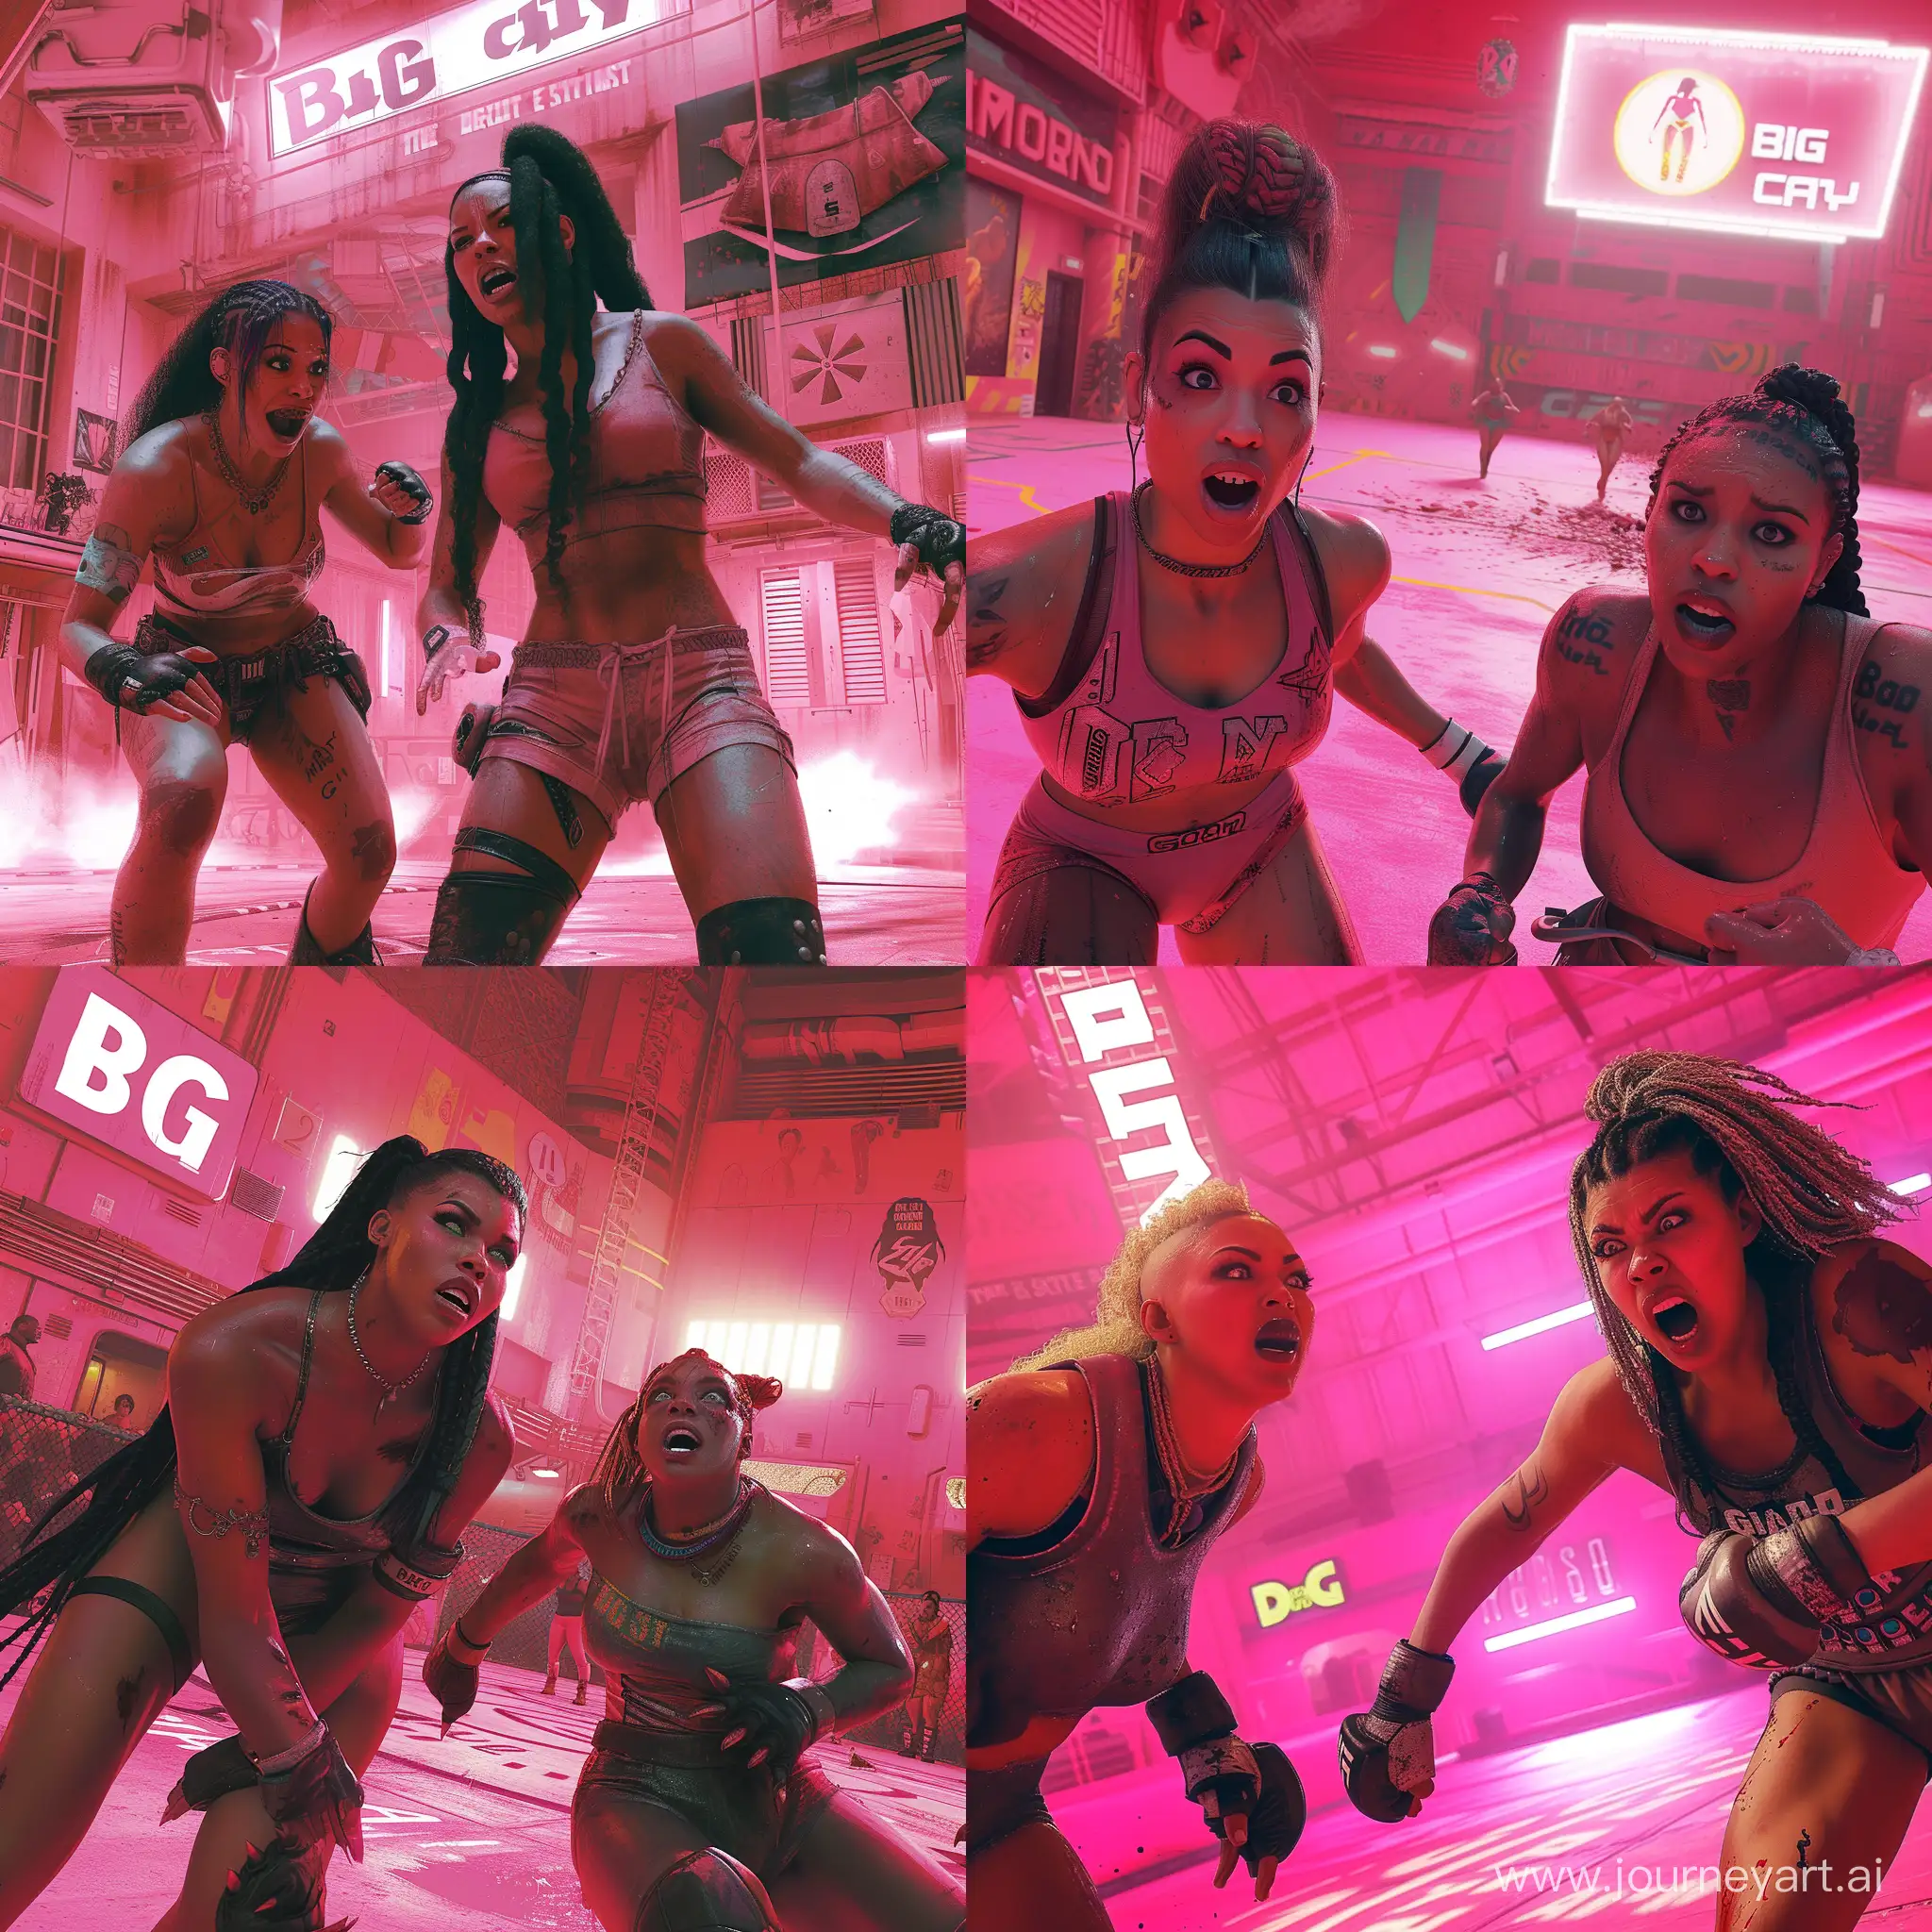 A photorealistic image of a fight scene in a wide shot. The setting is a pink, futuristic arena resembling 'Gag City.' One character, resembling Nicki Minaj, looks beautiful and dominant, while the other, resembling Megan Thee Stallion, appears scared. The composition captures the tense energy of the scene. Lighting is a mix of bright, neon-style and subtle, primarily in pink tones. In the background, there's a sign with a symbol signifying 'Big Foot.